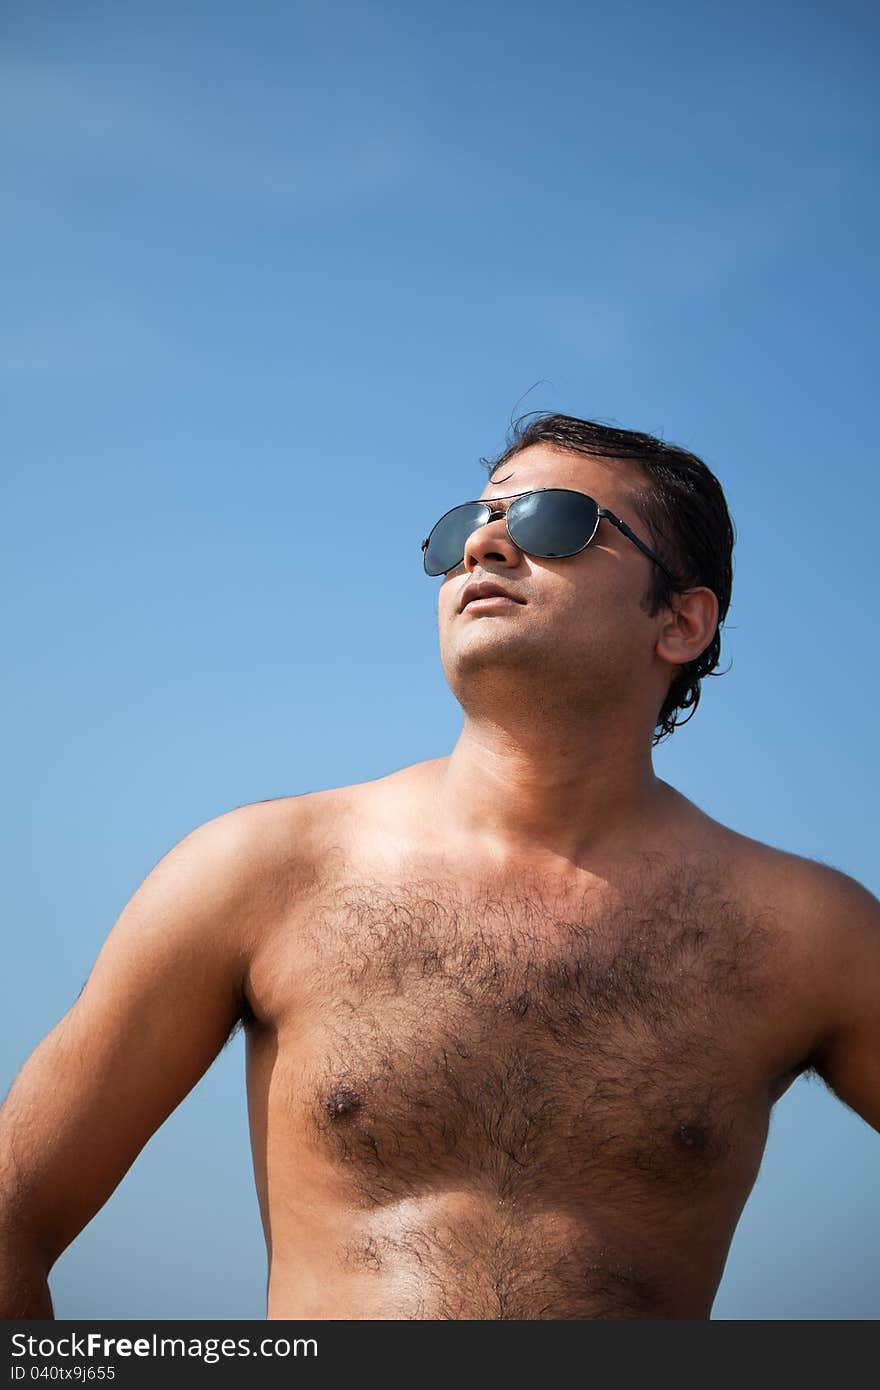 Indian Happy young man getting out of the water with sunglasses under blue sky. Indian Happy young man getting out of the water with sunglasses under blue sky